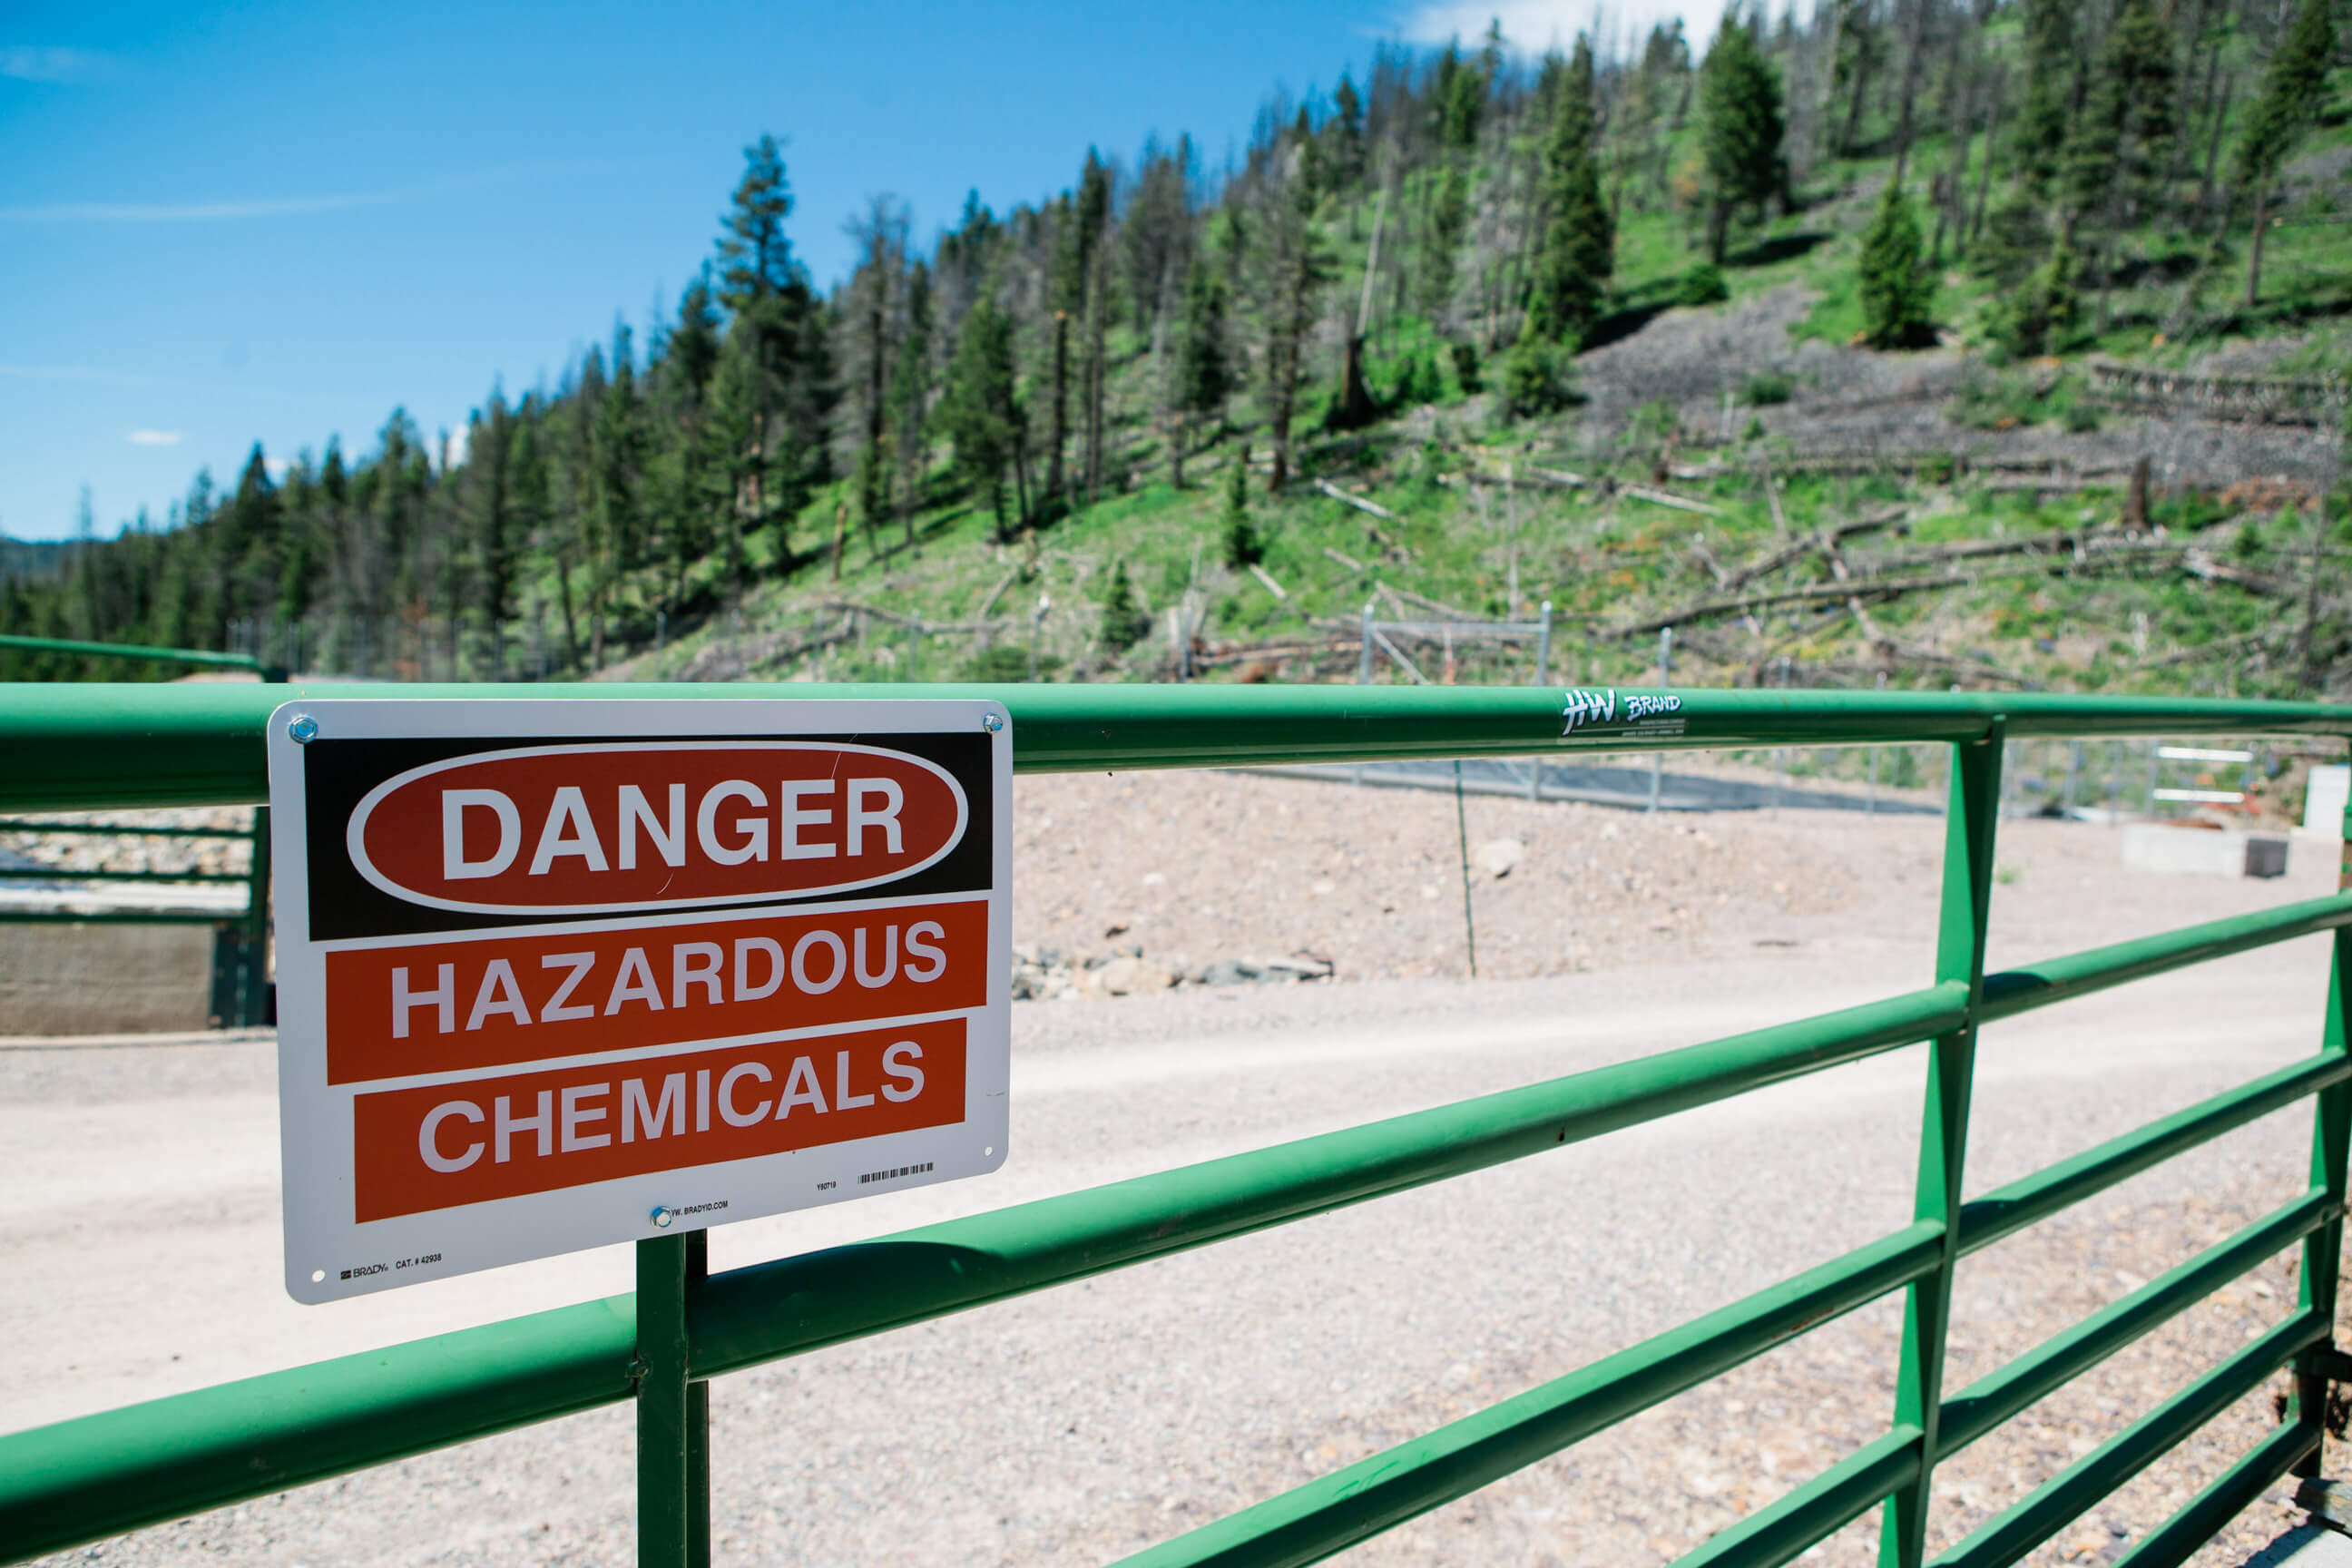 A danger sign on a gate warns people there are hazardous chemicals nearby